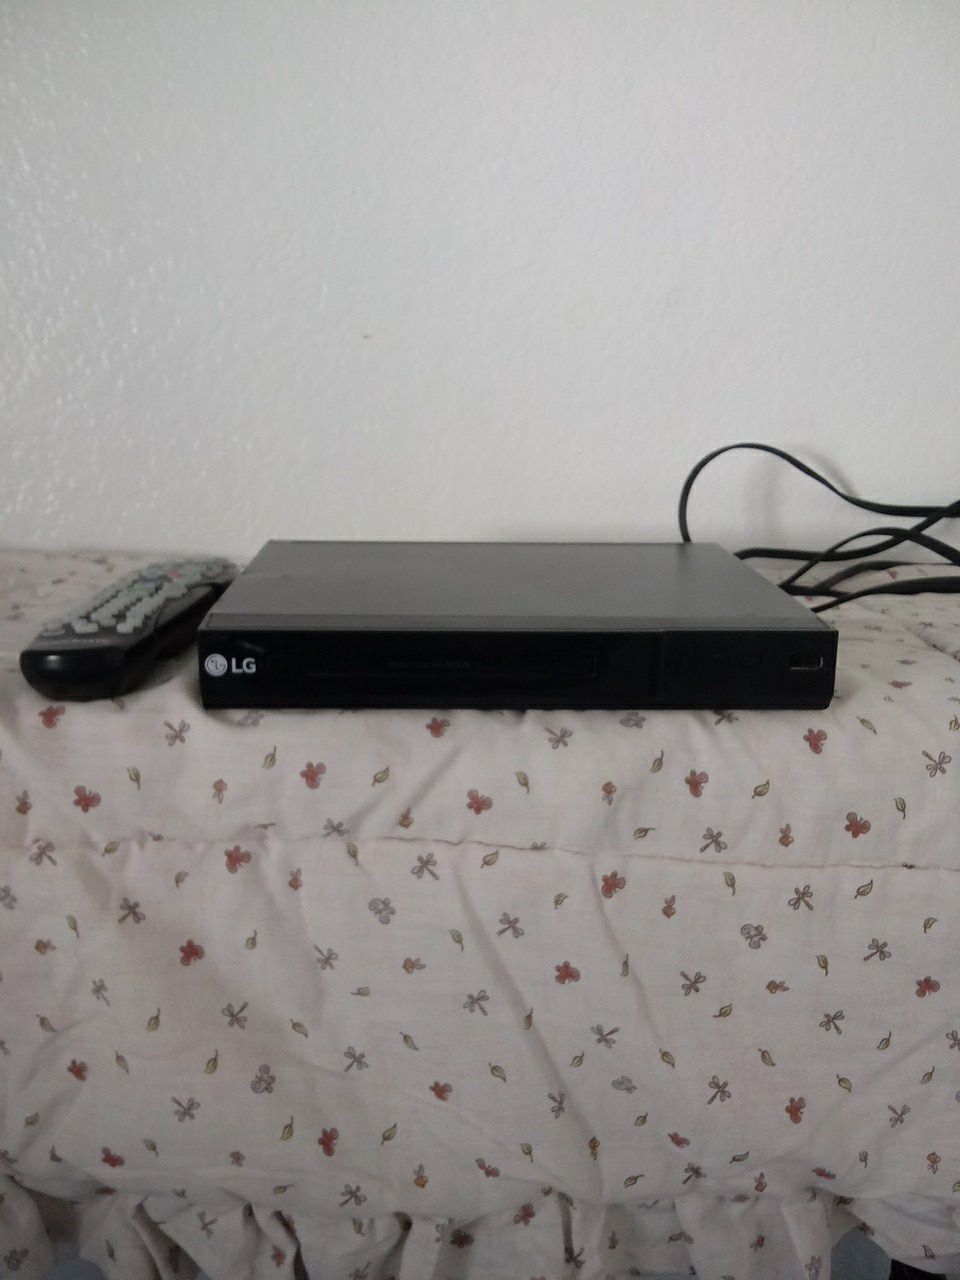 LG dvd player with remote